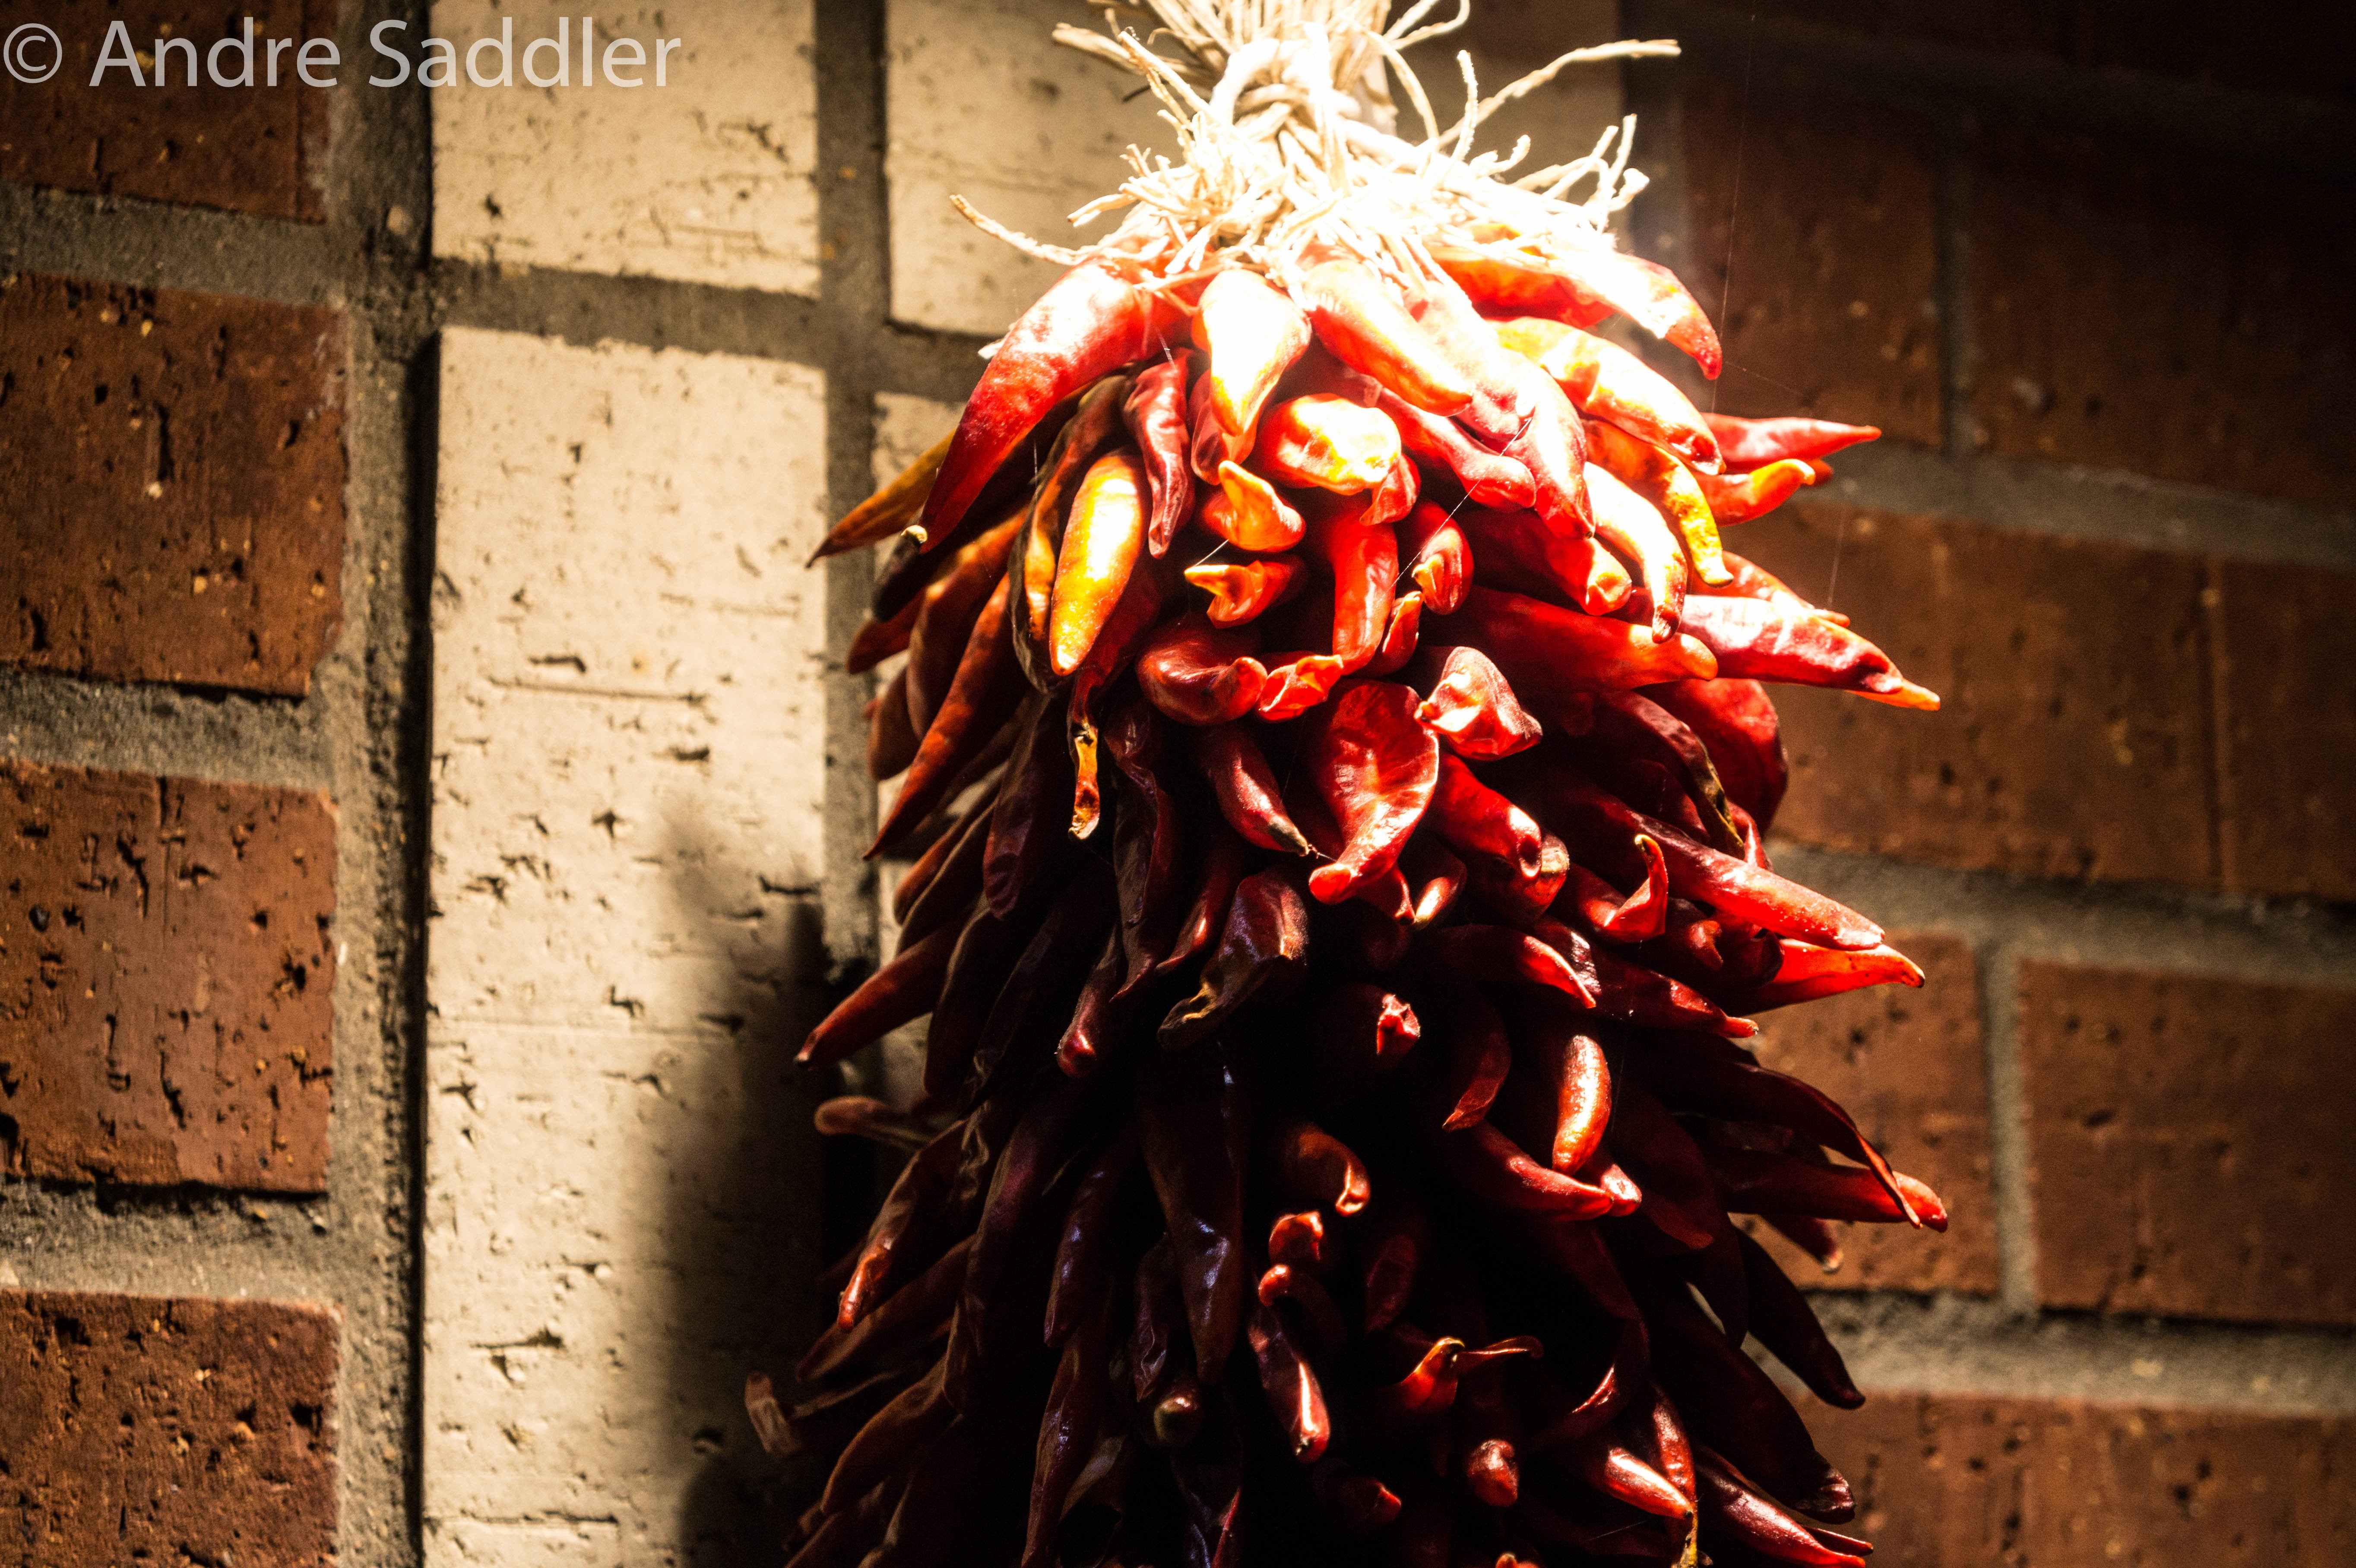 lightroom, chili pepper, food and drink, red, spice, close-up